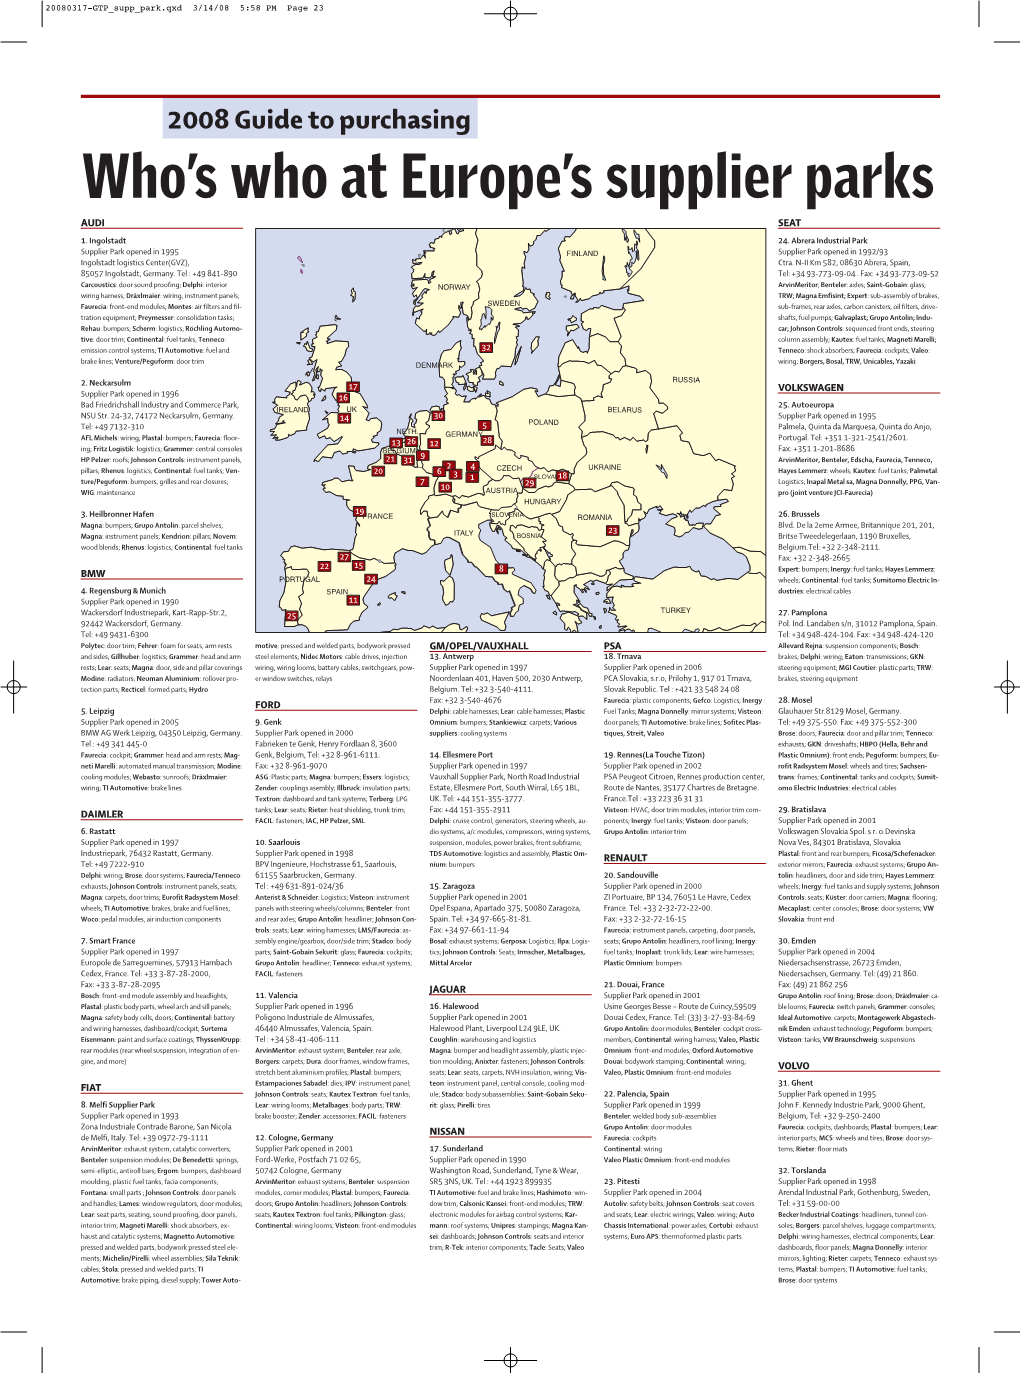 Who's Who at Europe's Supplier Parks